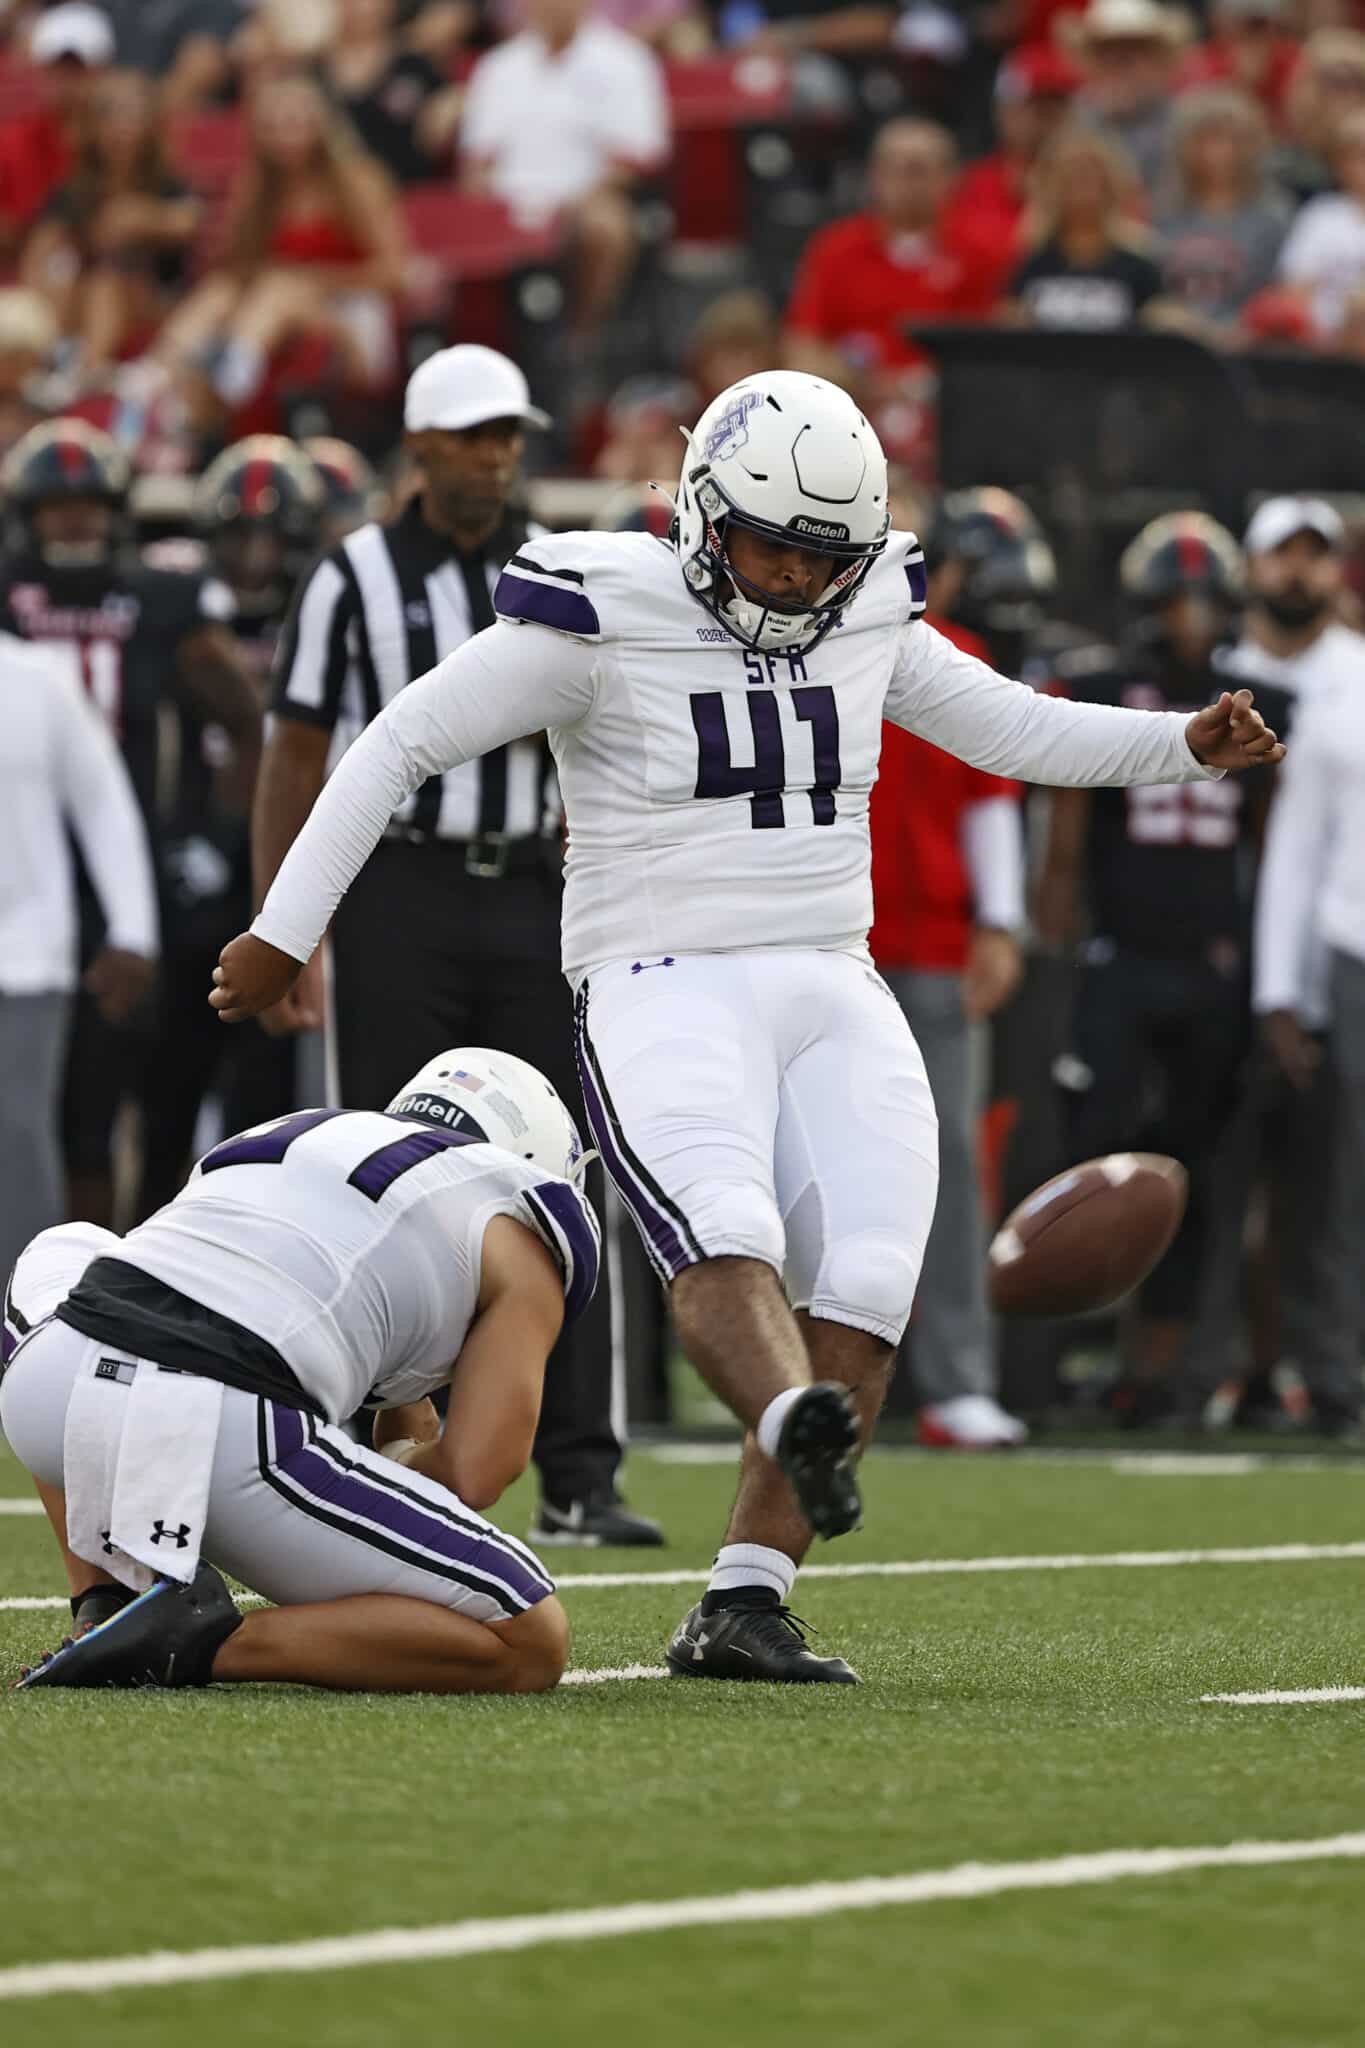 Stephen F. Austin's Chris Campos (41) kicks a field goal during the first half of an NCAA college football game against Texas Tech, Saturday, Sept. 11, 2021, in Lubbock, Texas. (AP Photo/Brad Tollefson)